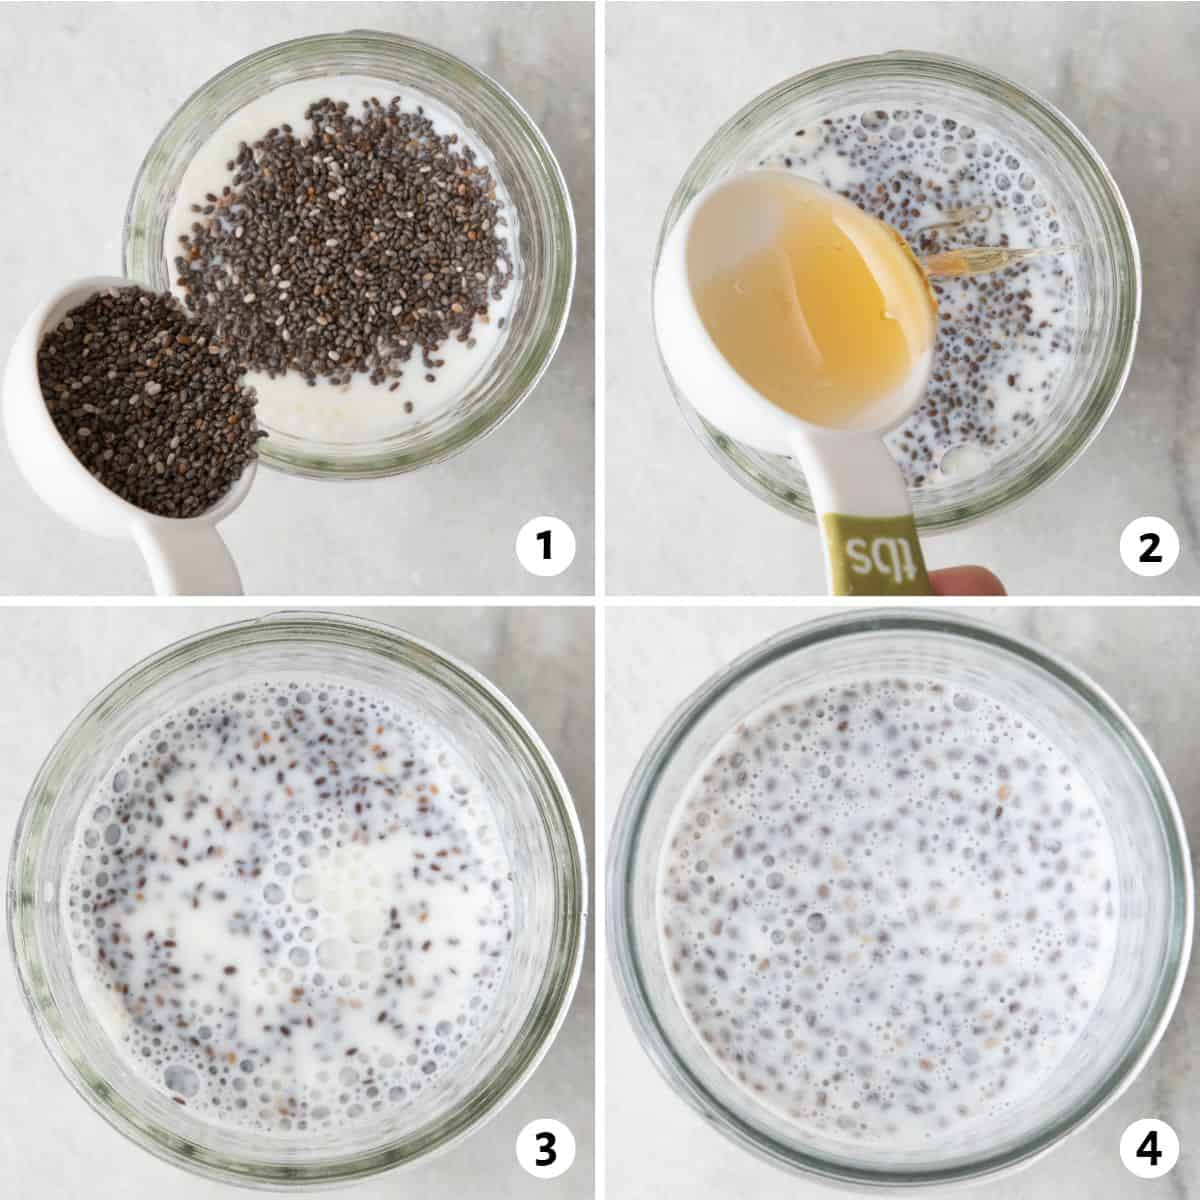 4 image collage making recipe in a jar: 1- chia seeds sprinkled on top from a tablespoon, 2- honey being added, 3- chia pudding after mixed before set, 4- chia pudding after set.